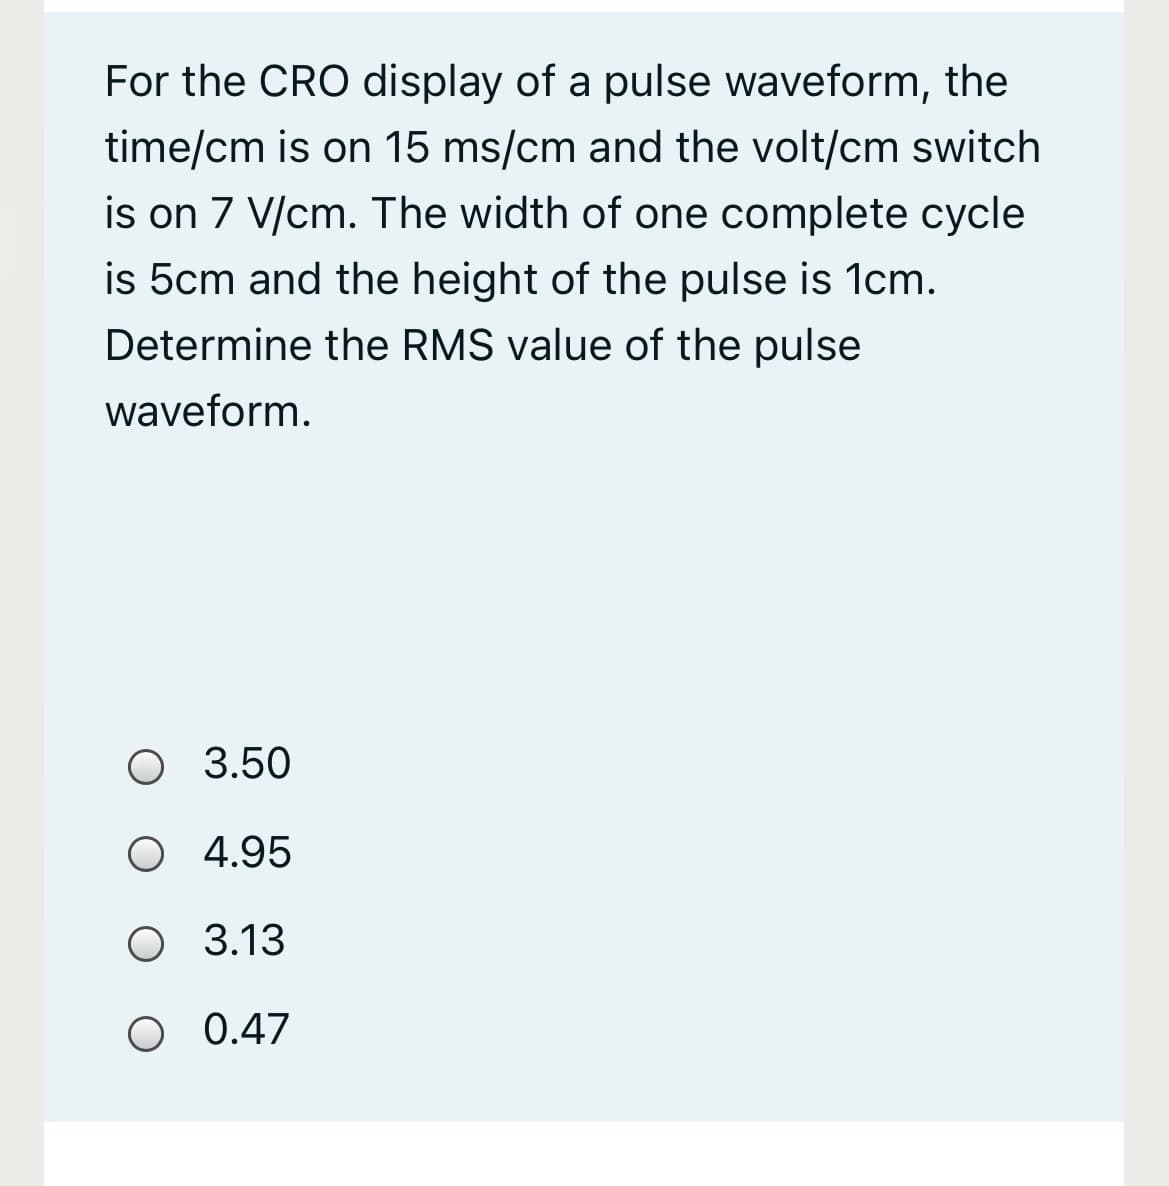 For the CRO display of a pulse waveform, the
time/cm is on 15 ms/cm and the volt/cm switch
is on 7 V/cm. The width of one complete cycle
is 5cm and the height of the pulse is 1cm.
Determine the RMS value of the pulse
waveform.
O 3.50
O 4.95
O 3.13
O 0.47
